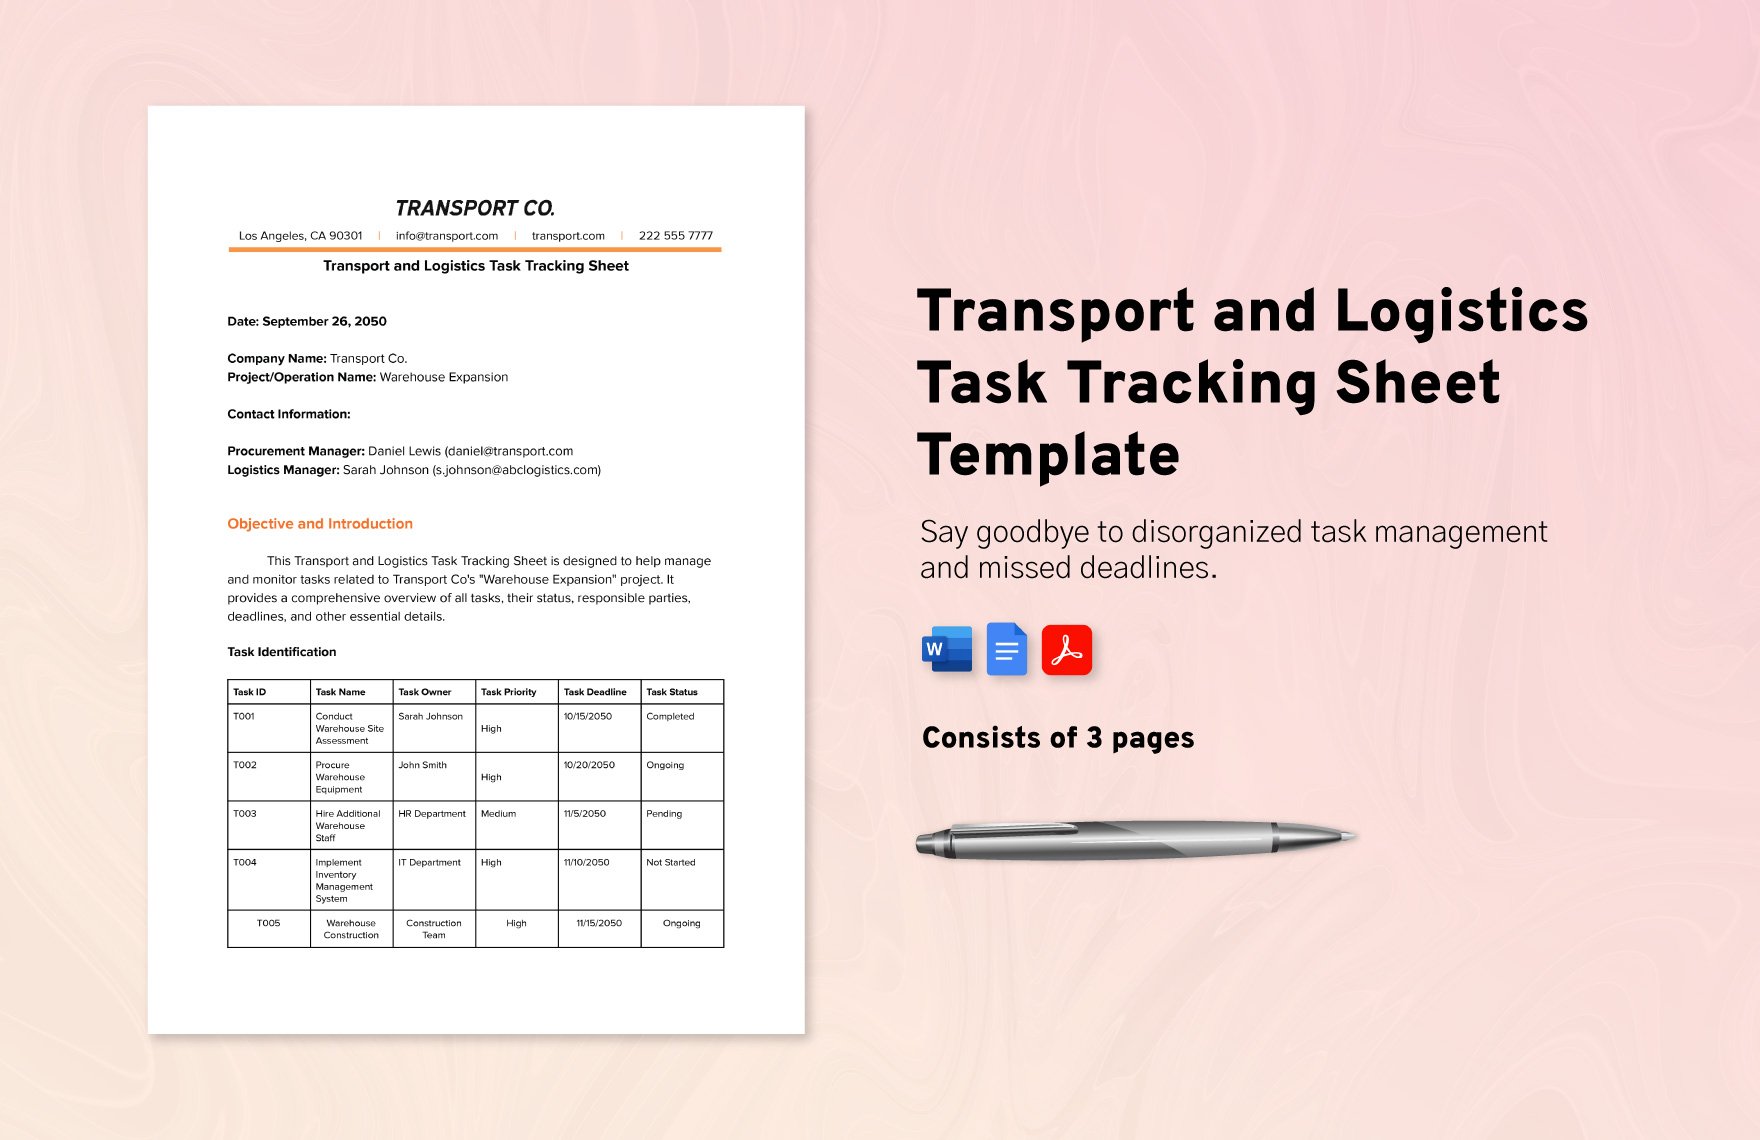 Transport and Logistics Task Tracking Sheet Template